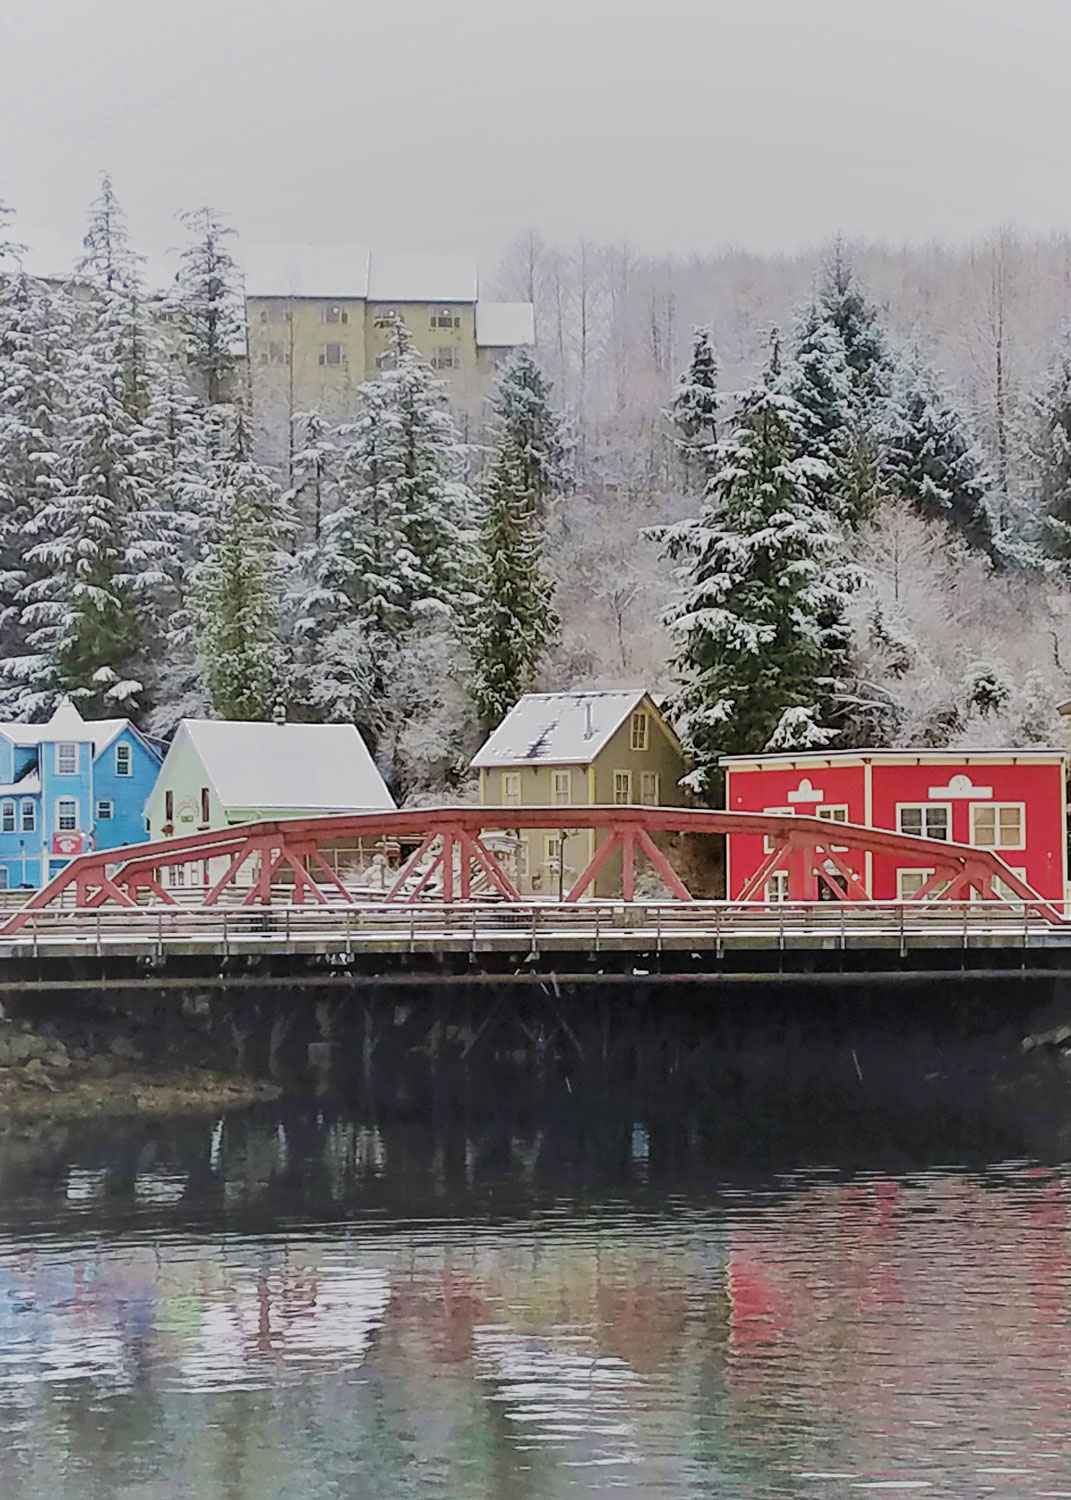  Ketchikan's red bridge and the brightly colored houses of the former red light district.  